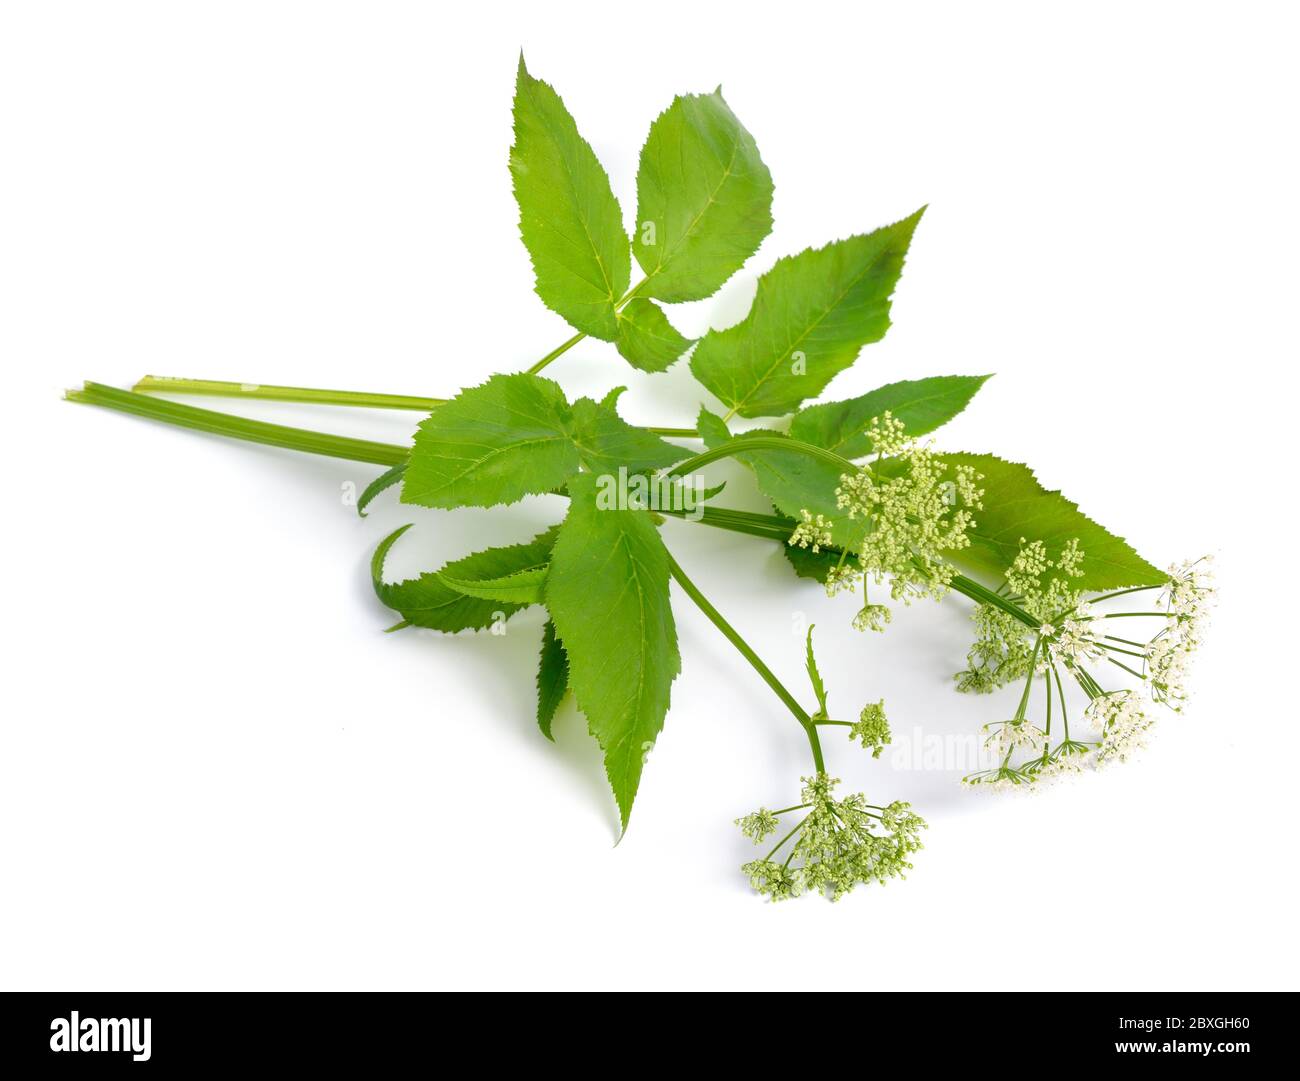 Aegopodium podagraria or ground elder, herb gerard, bishop's weed, goutweed, gout wort, and snow-in-the-mountain. Stock Photo